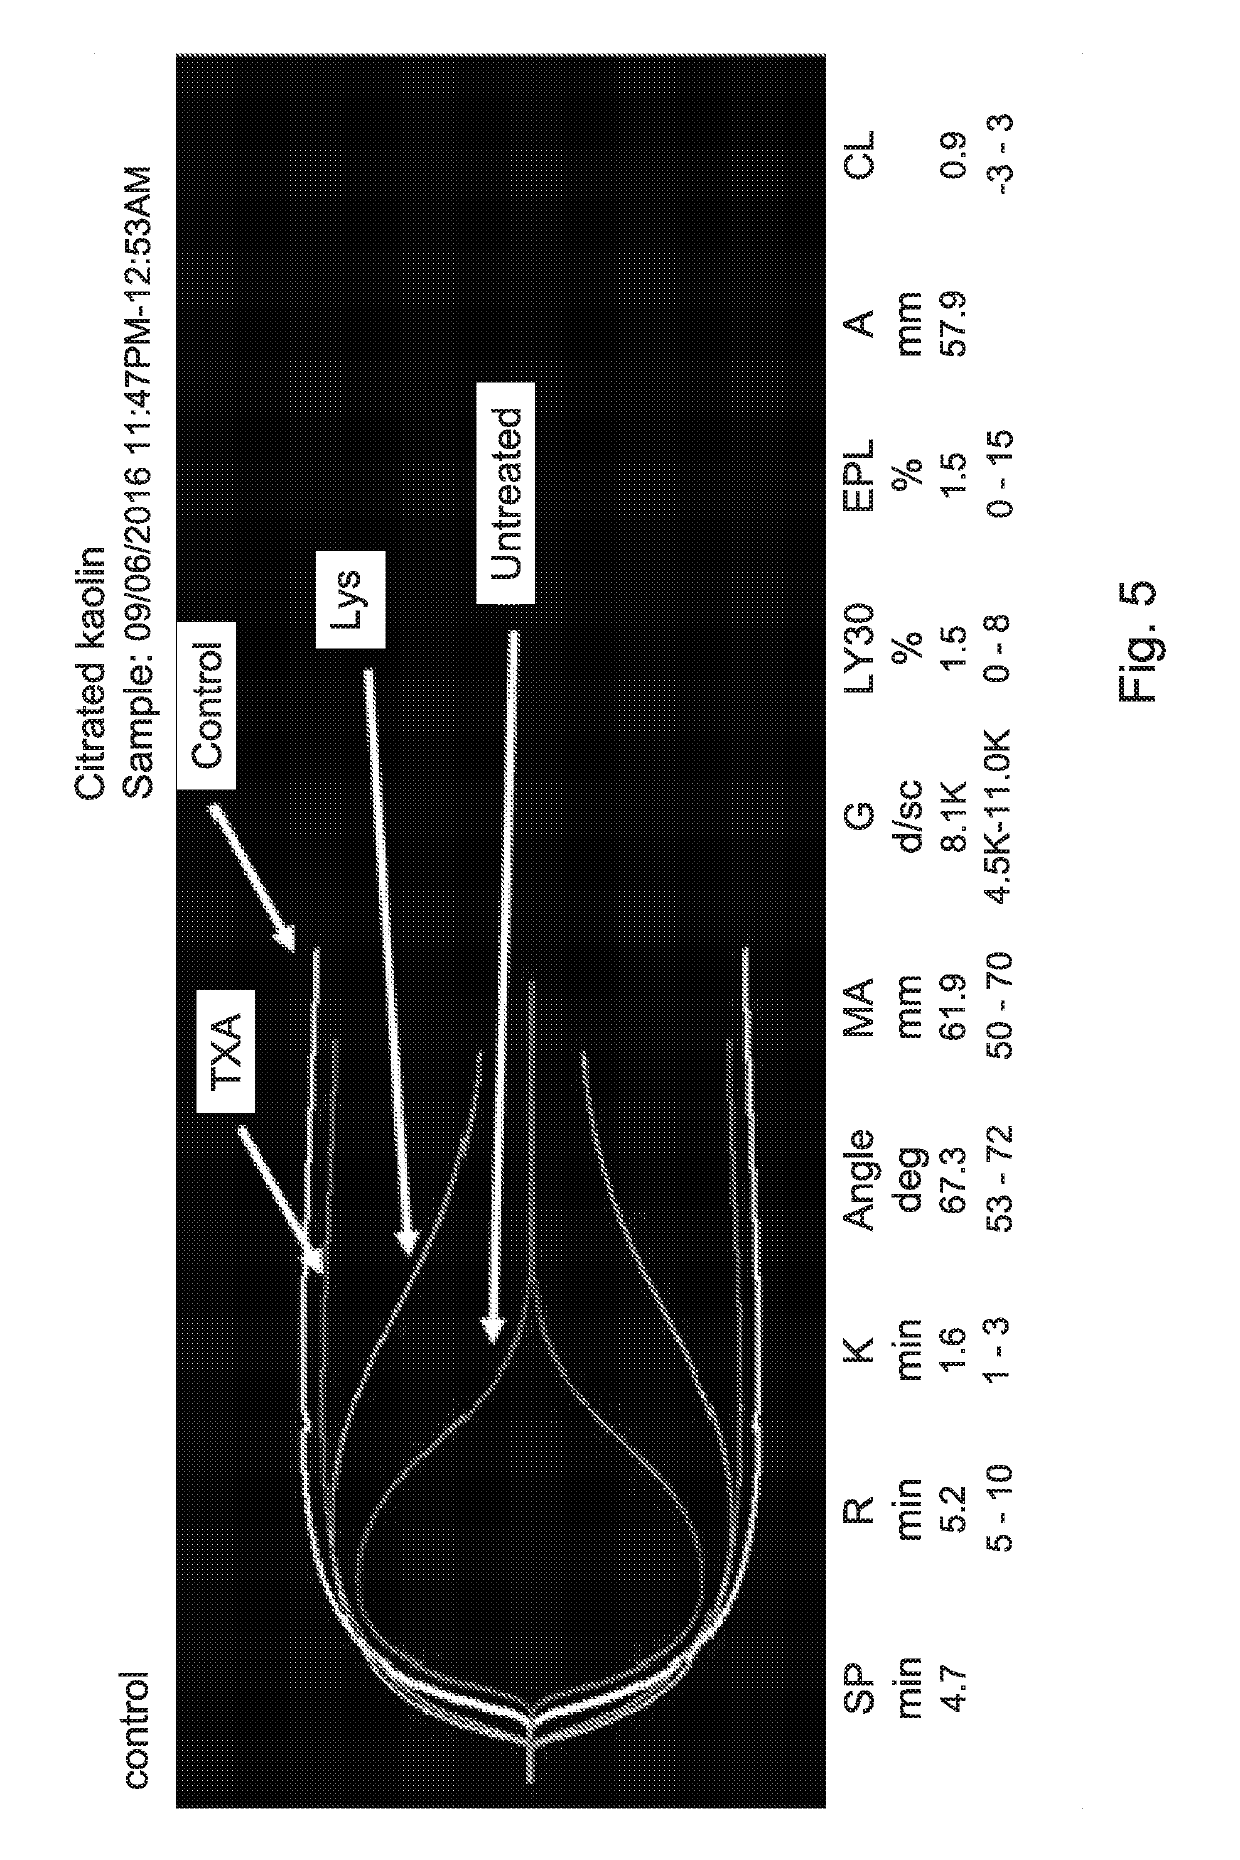 Human blood-derived products having decreased fibrinolytic activity and uses thereof in hemostatic disorders